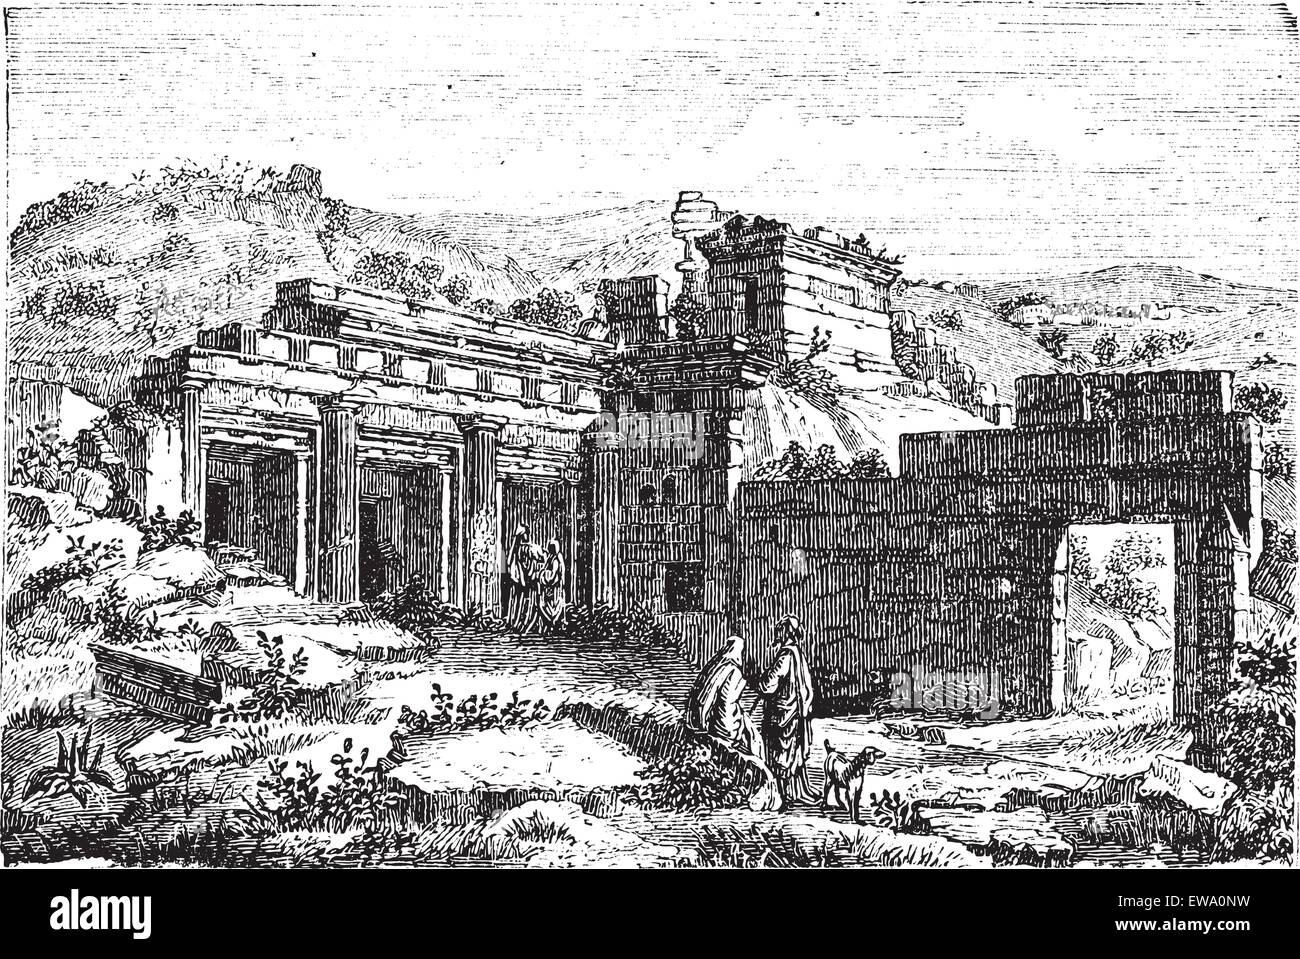 Ruins of Cyrene, in Shahhat, Libya, during the 1890s, vintage engraving. Old engraved illustration of the Ruins of Cyrene. Stock Vector